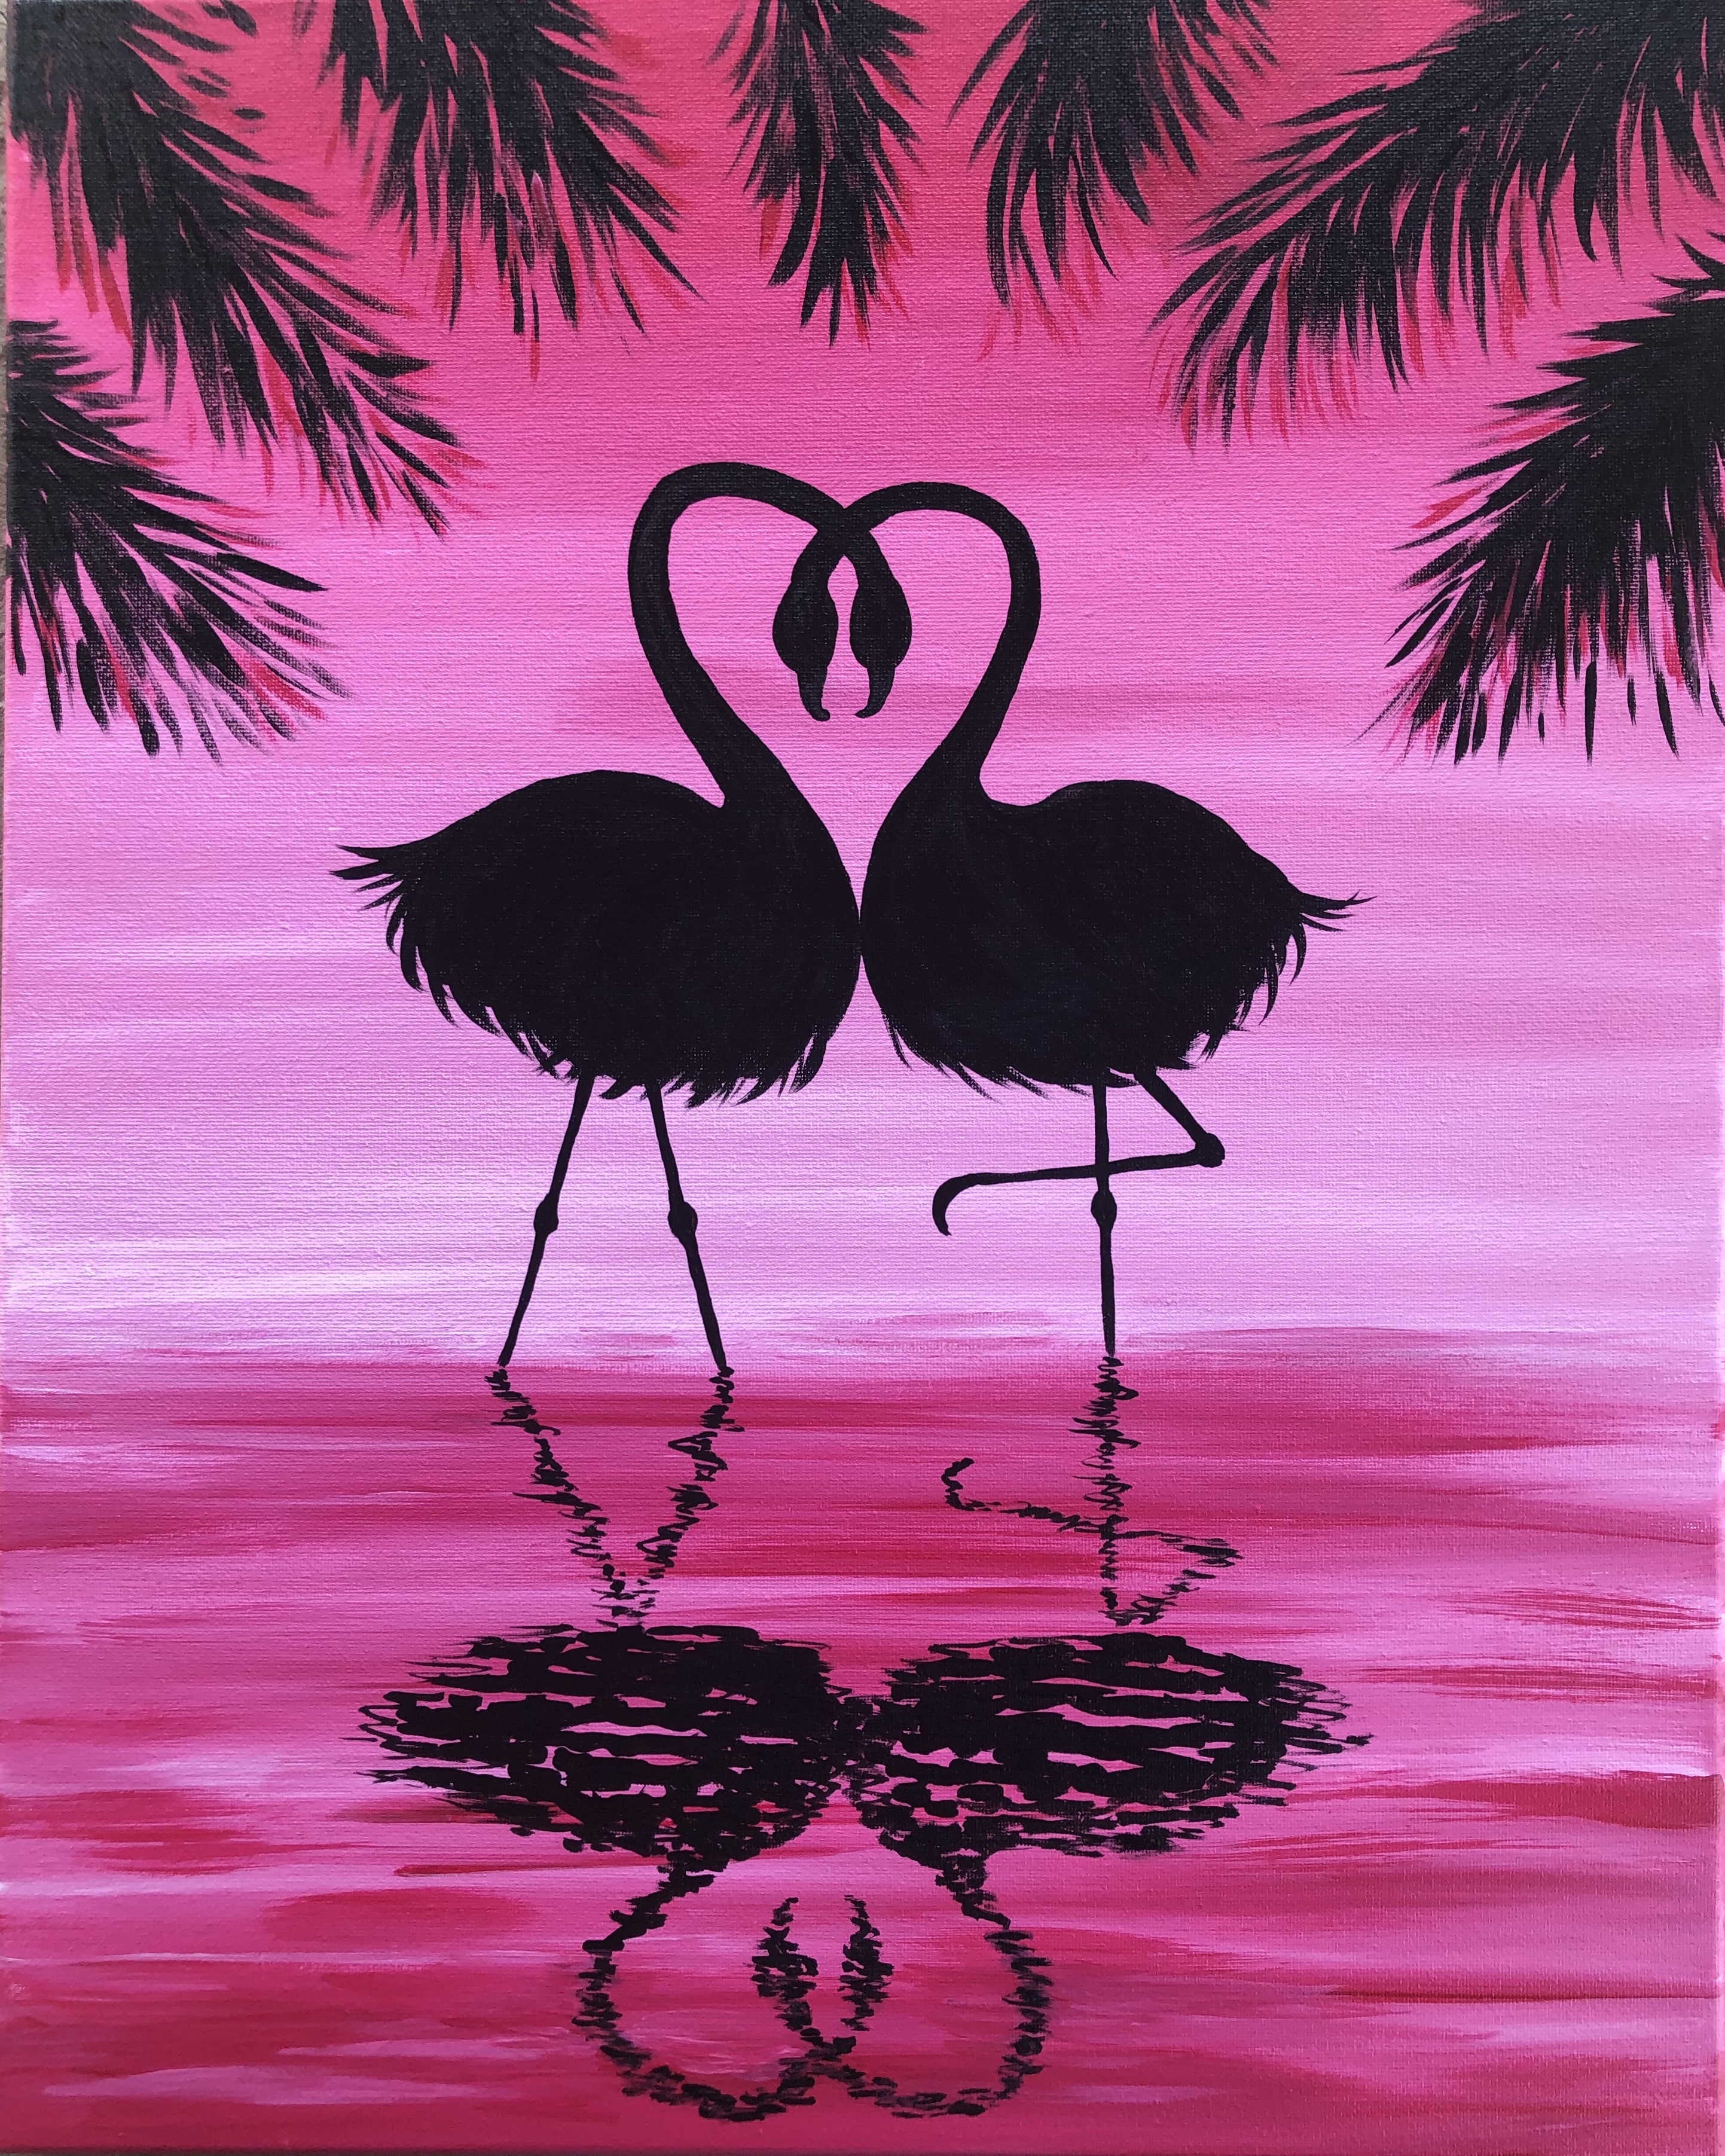 A Flamingo Tango experience project by Yaymaker